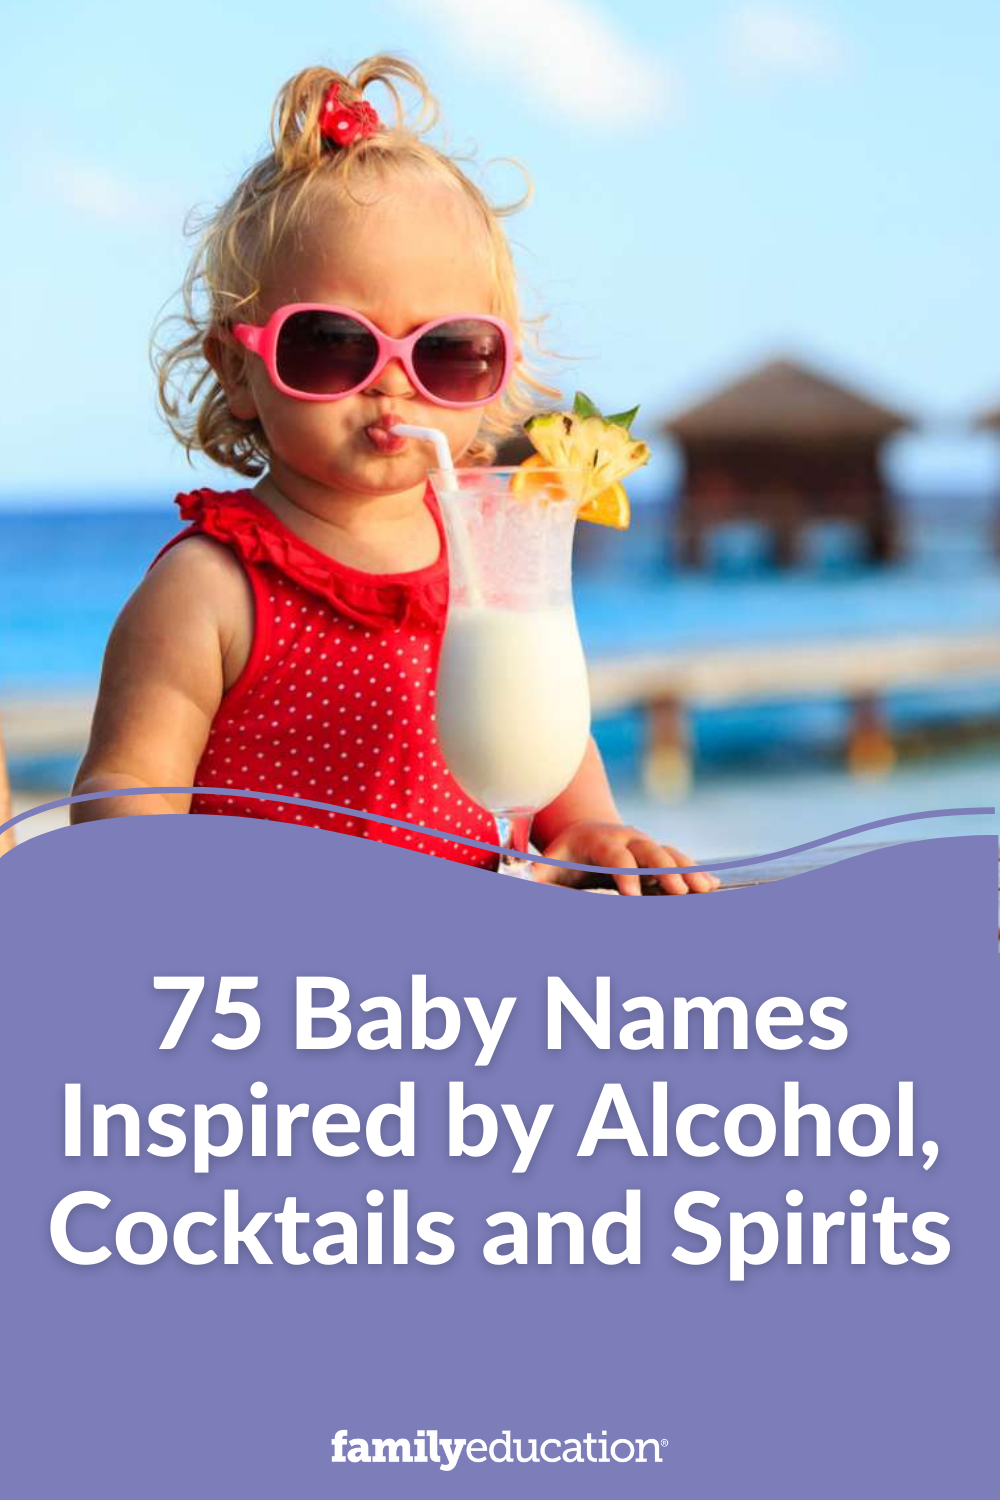 75 Baby Names Inspired by Alcohol, Cocktails and Spirits - Pinterest